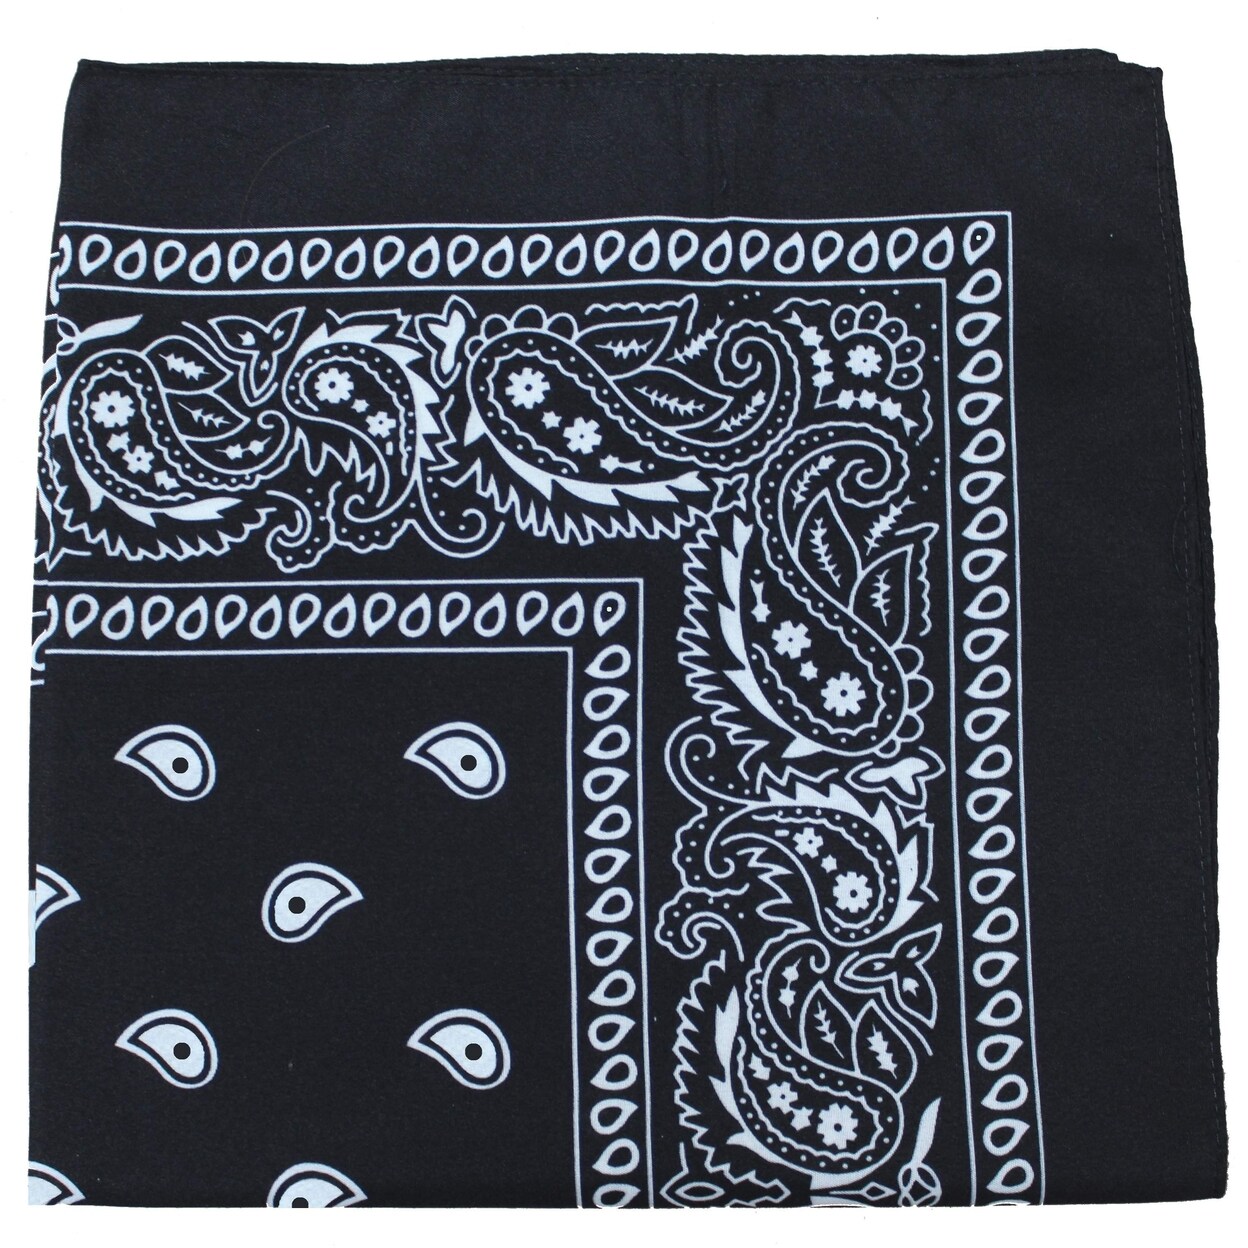 Balec Pack of 6 Paisley Cotton Bandanas Novelty Headwraps - 22 inches